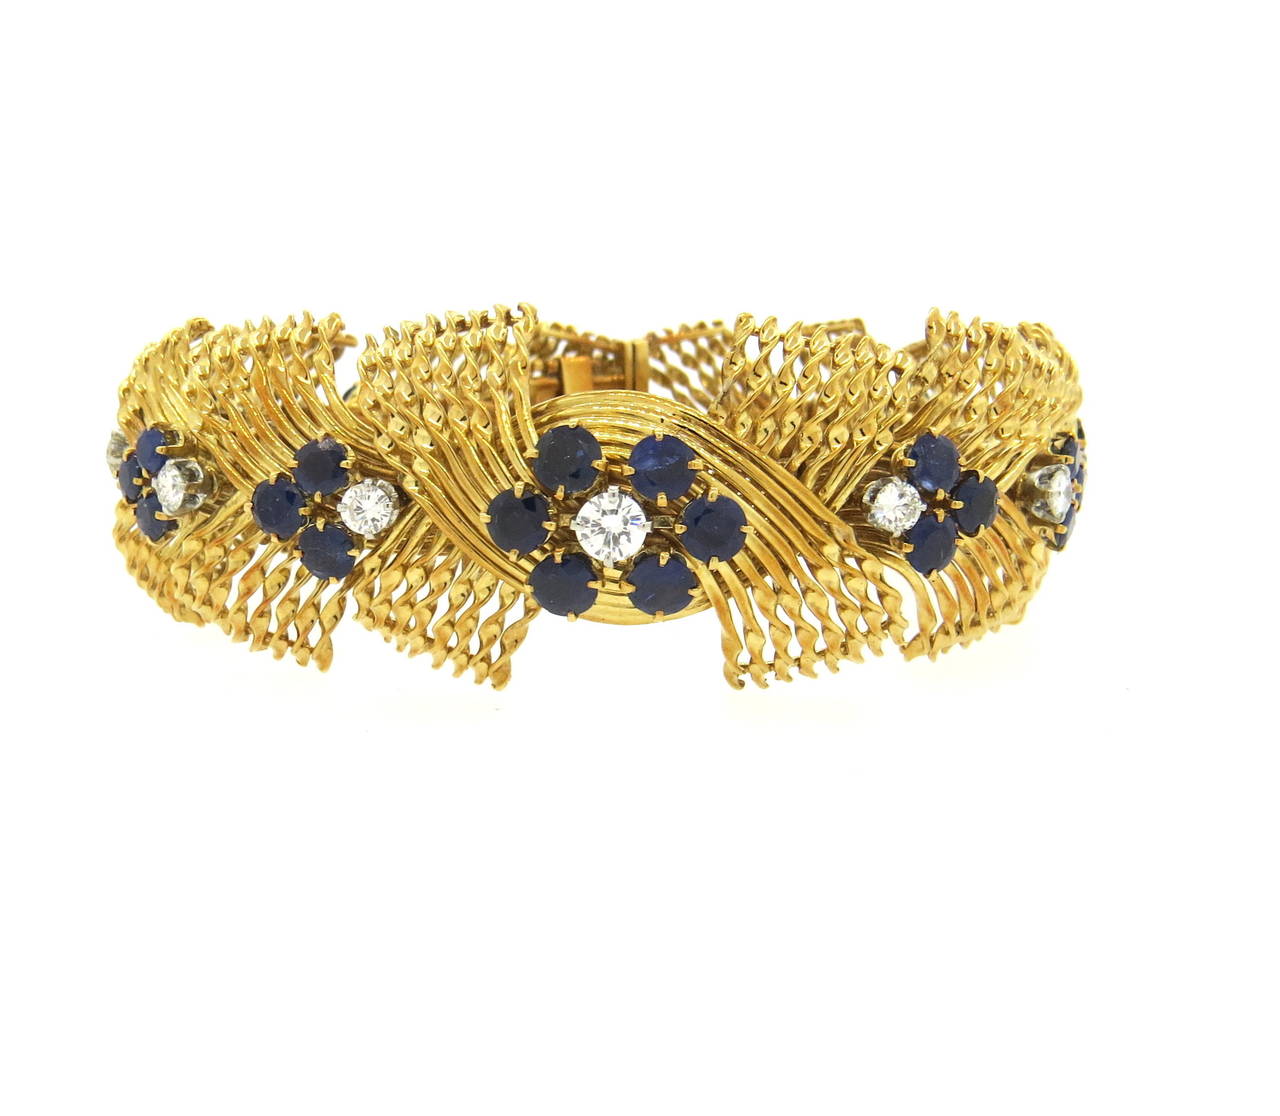 Impressive 18k yellow gold French bracelet, crafted in circa 1960s, set with blue sapphires and approximately 1.80 --2.00ctw in G/VS diamonds. Bracelet is 6 7/8